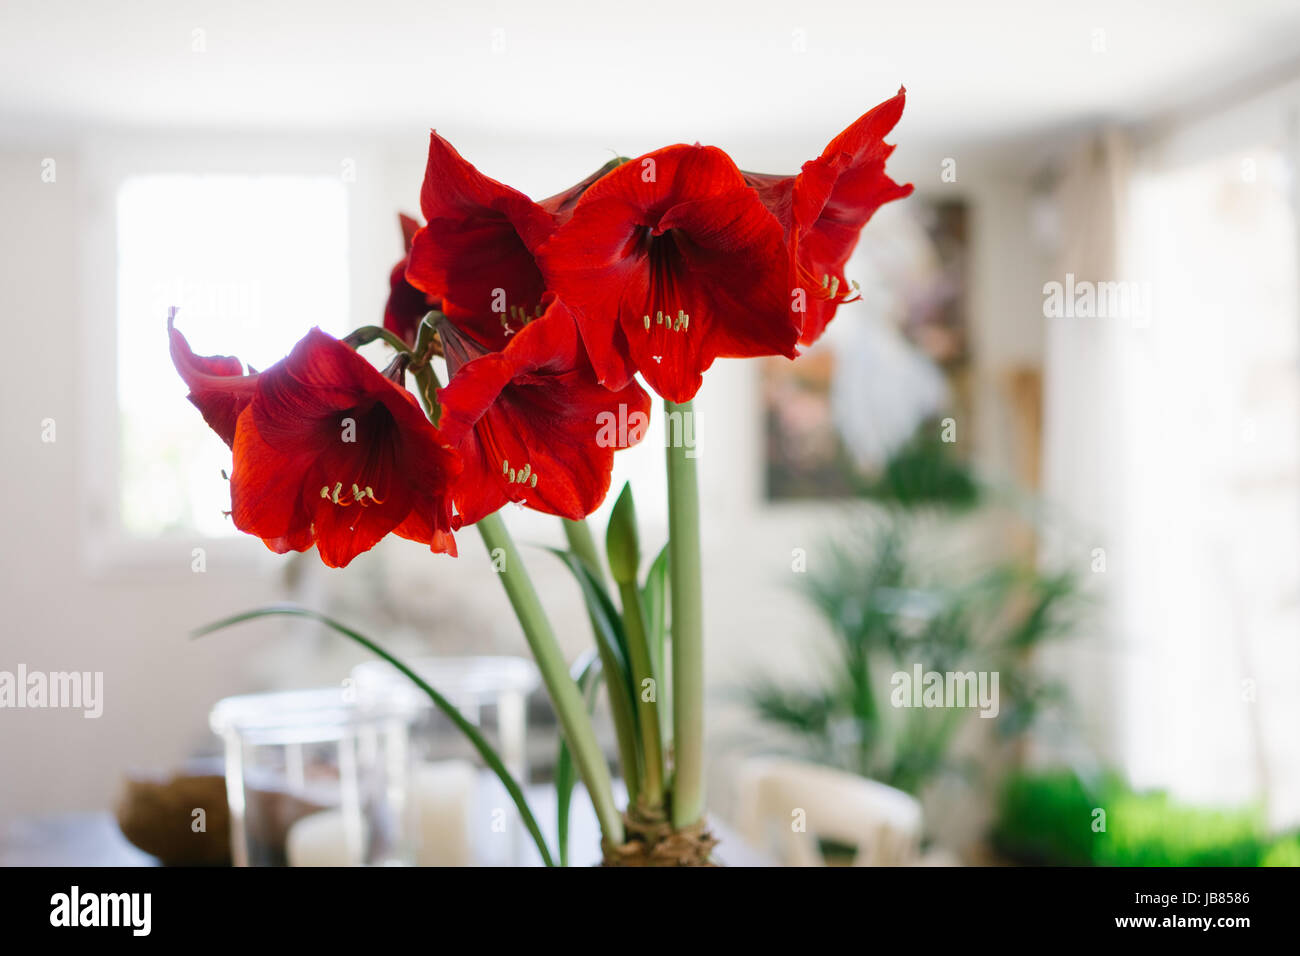 Red Amaryllis in a pot indoors with a decorative interior Stock Photo